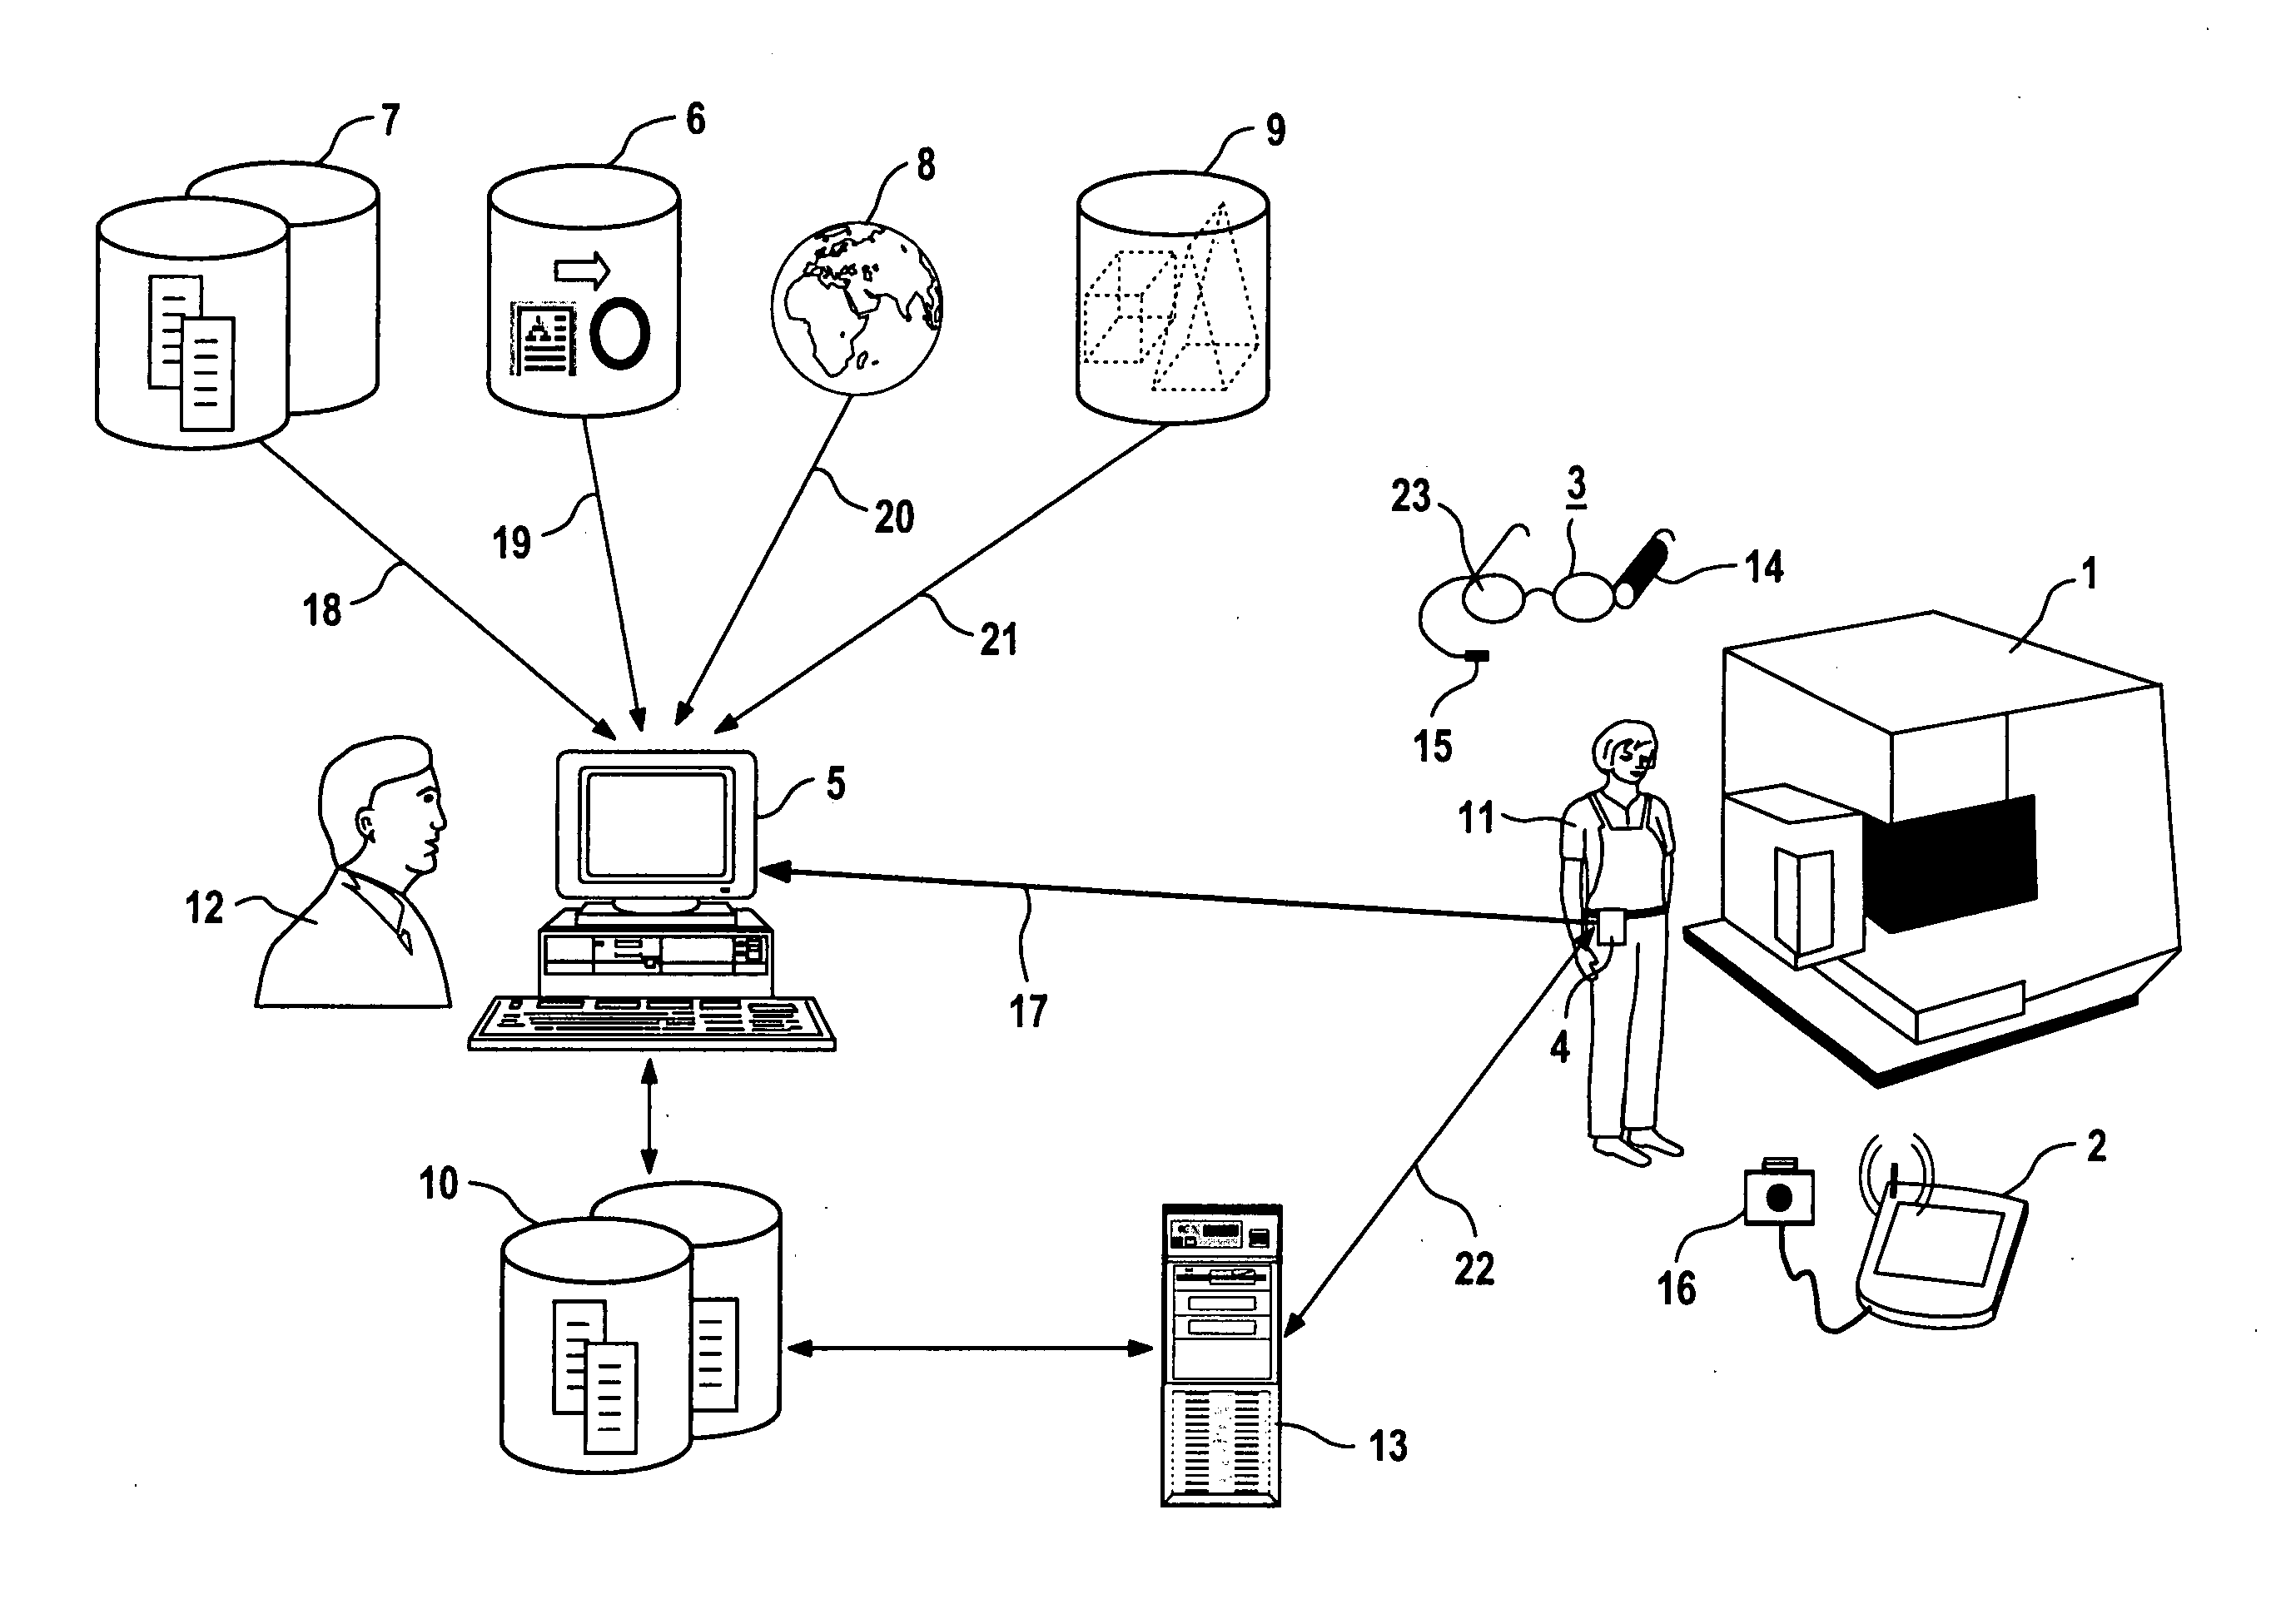 System and method for establising a documentation of working processes for display in an augmented reality system in particular in a production assembly service or maintenance enviroment